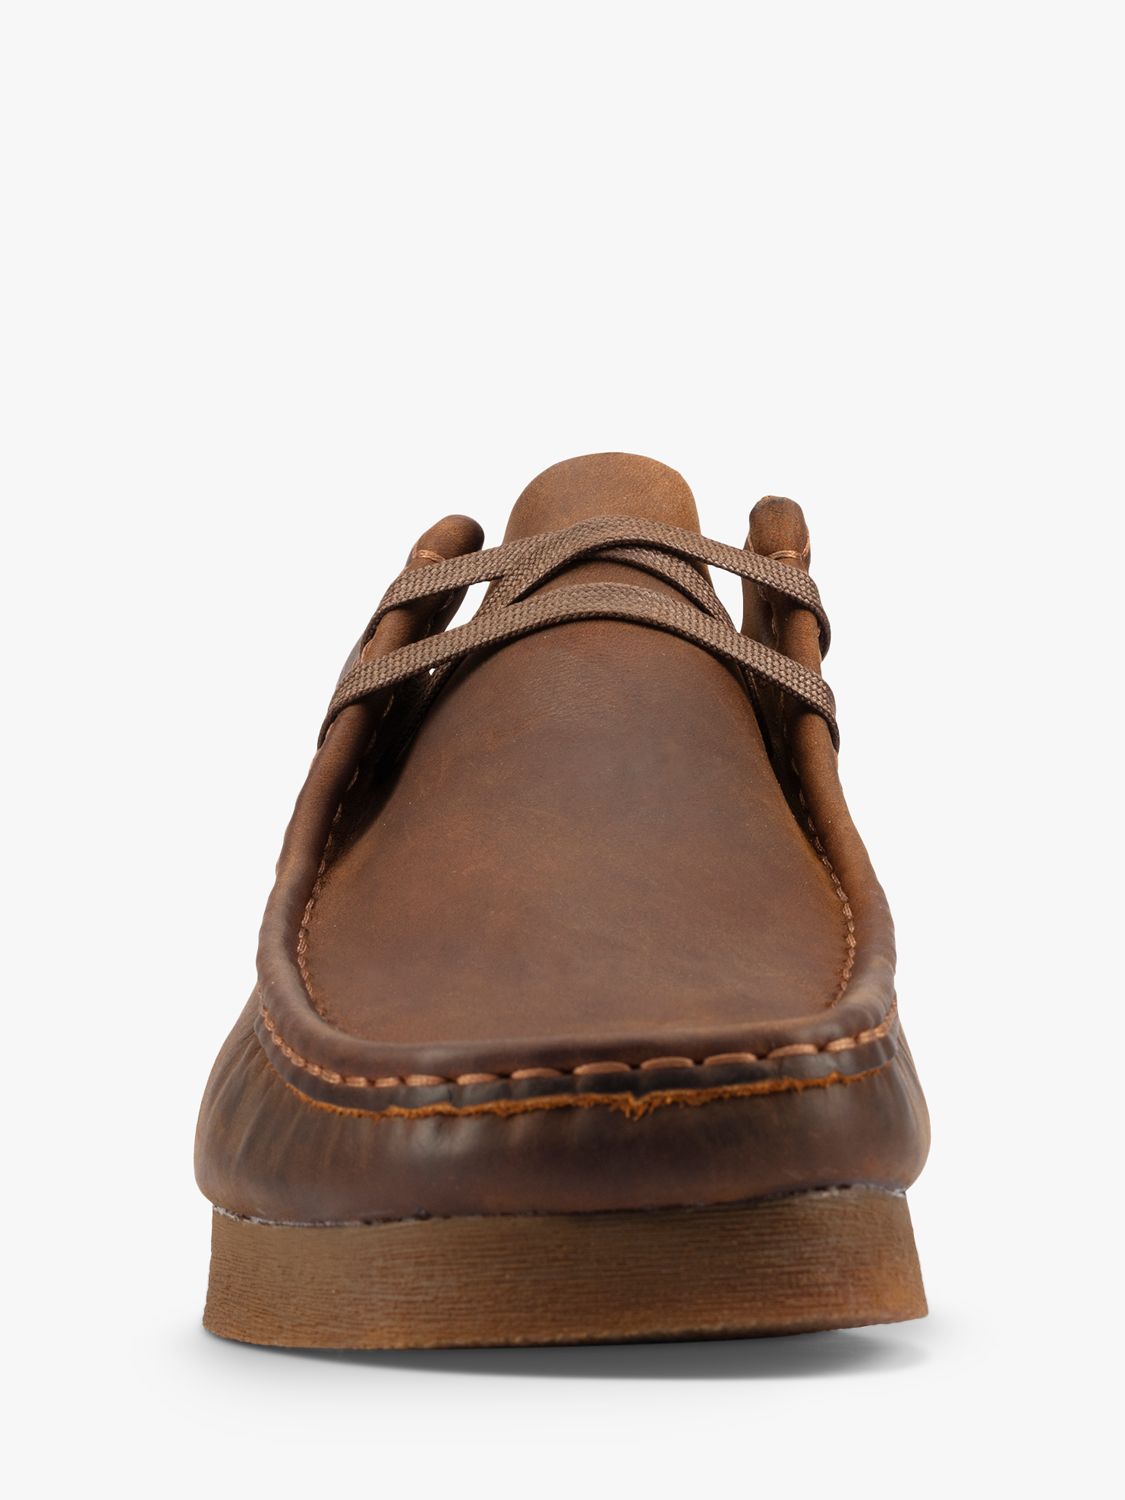 Clarks Wallabee 2 Leather Moccasin Shoes, Beeswax at John Lewis & Partners